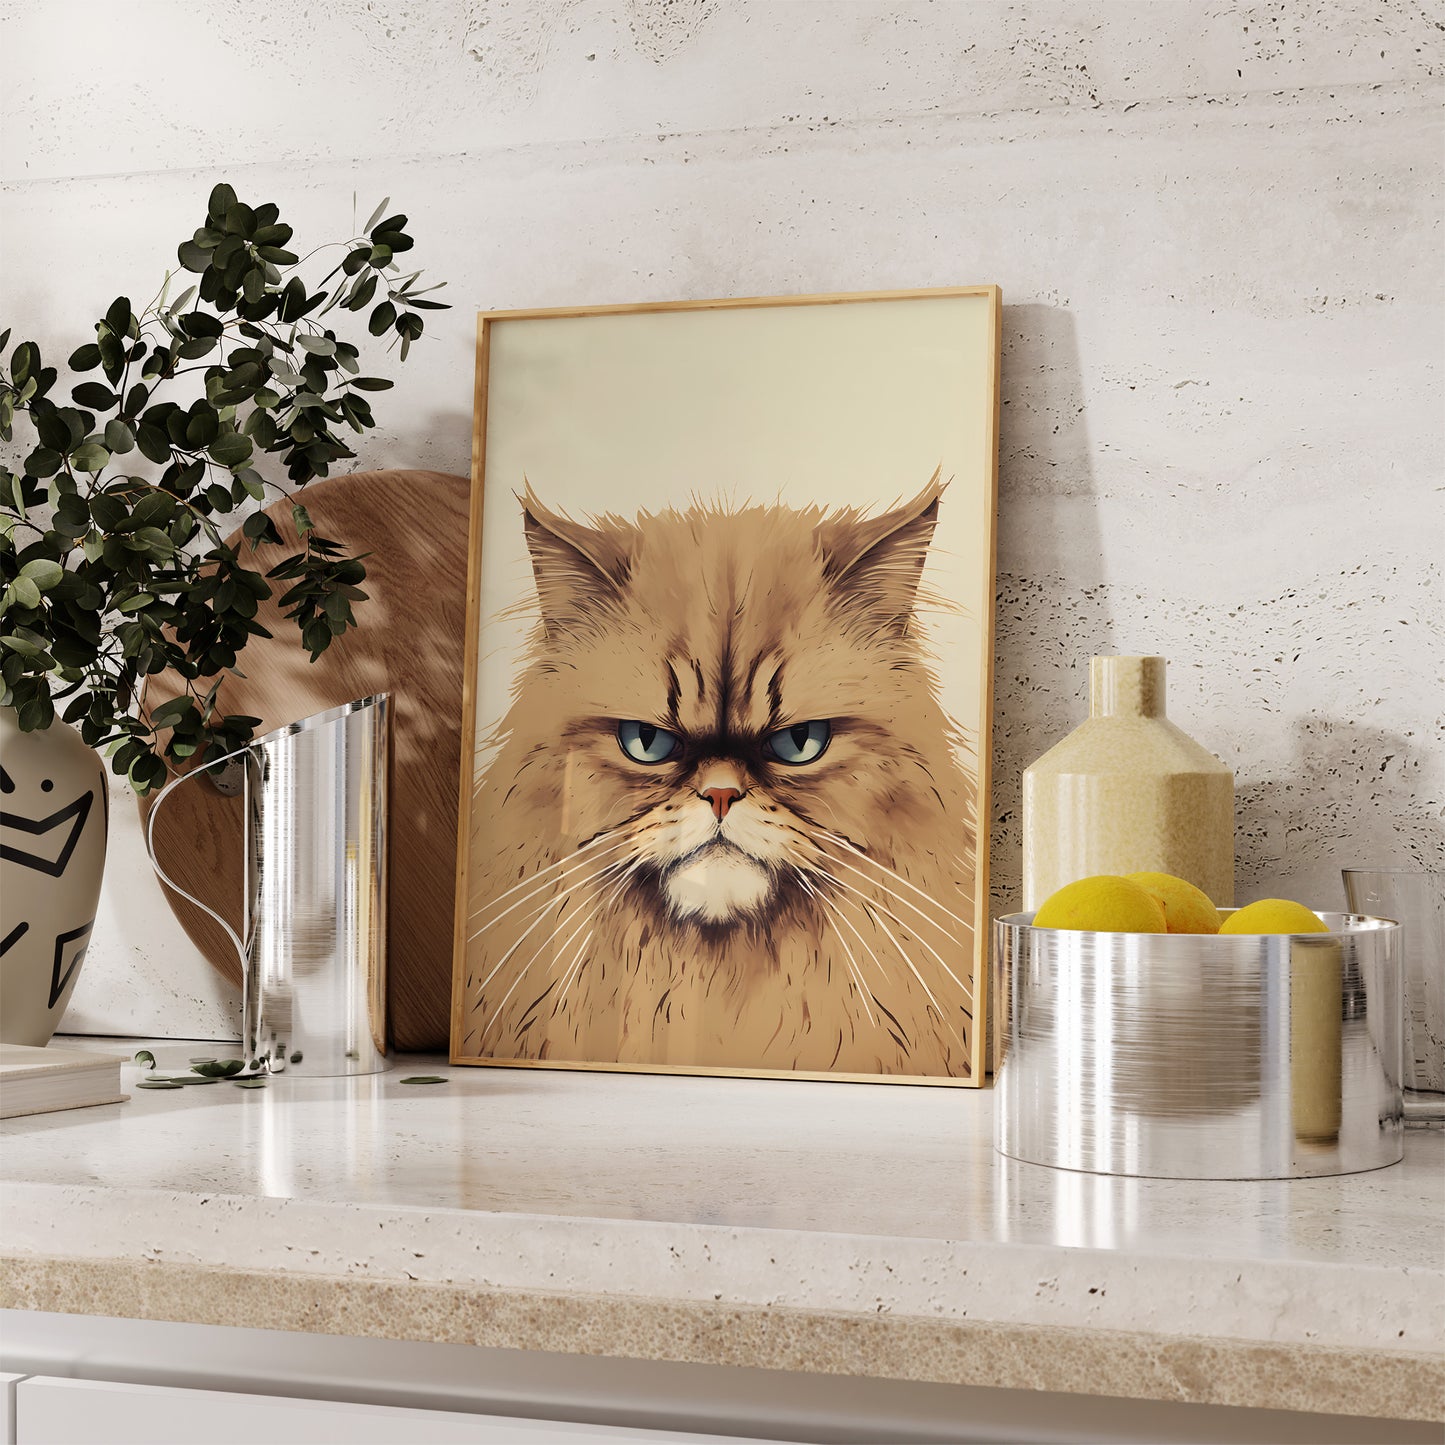 A framed painting of an angry cat on a kitchen counter beside decorative items.